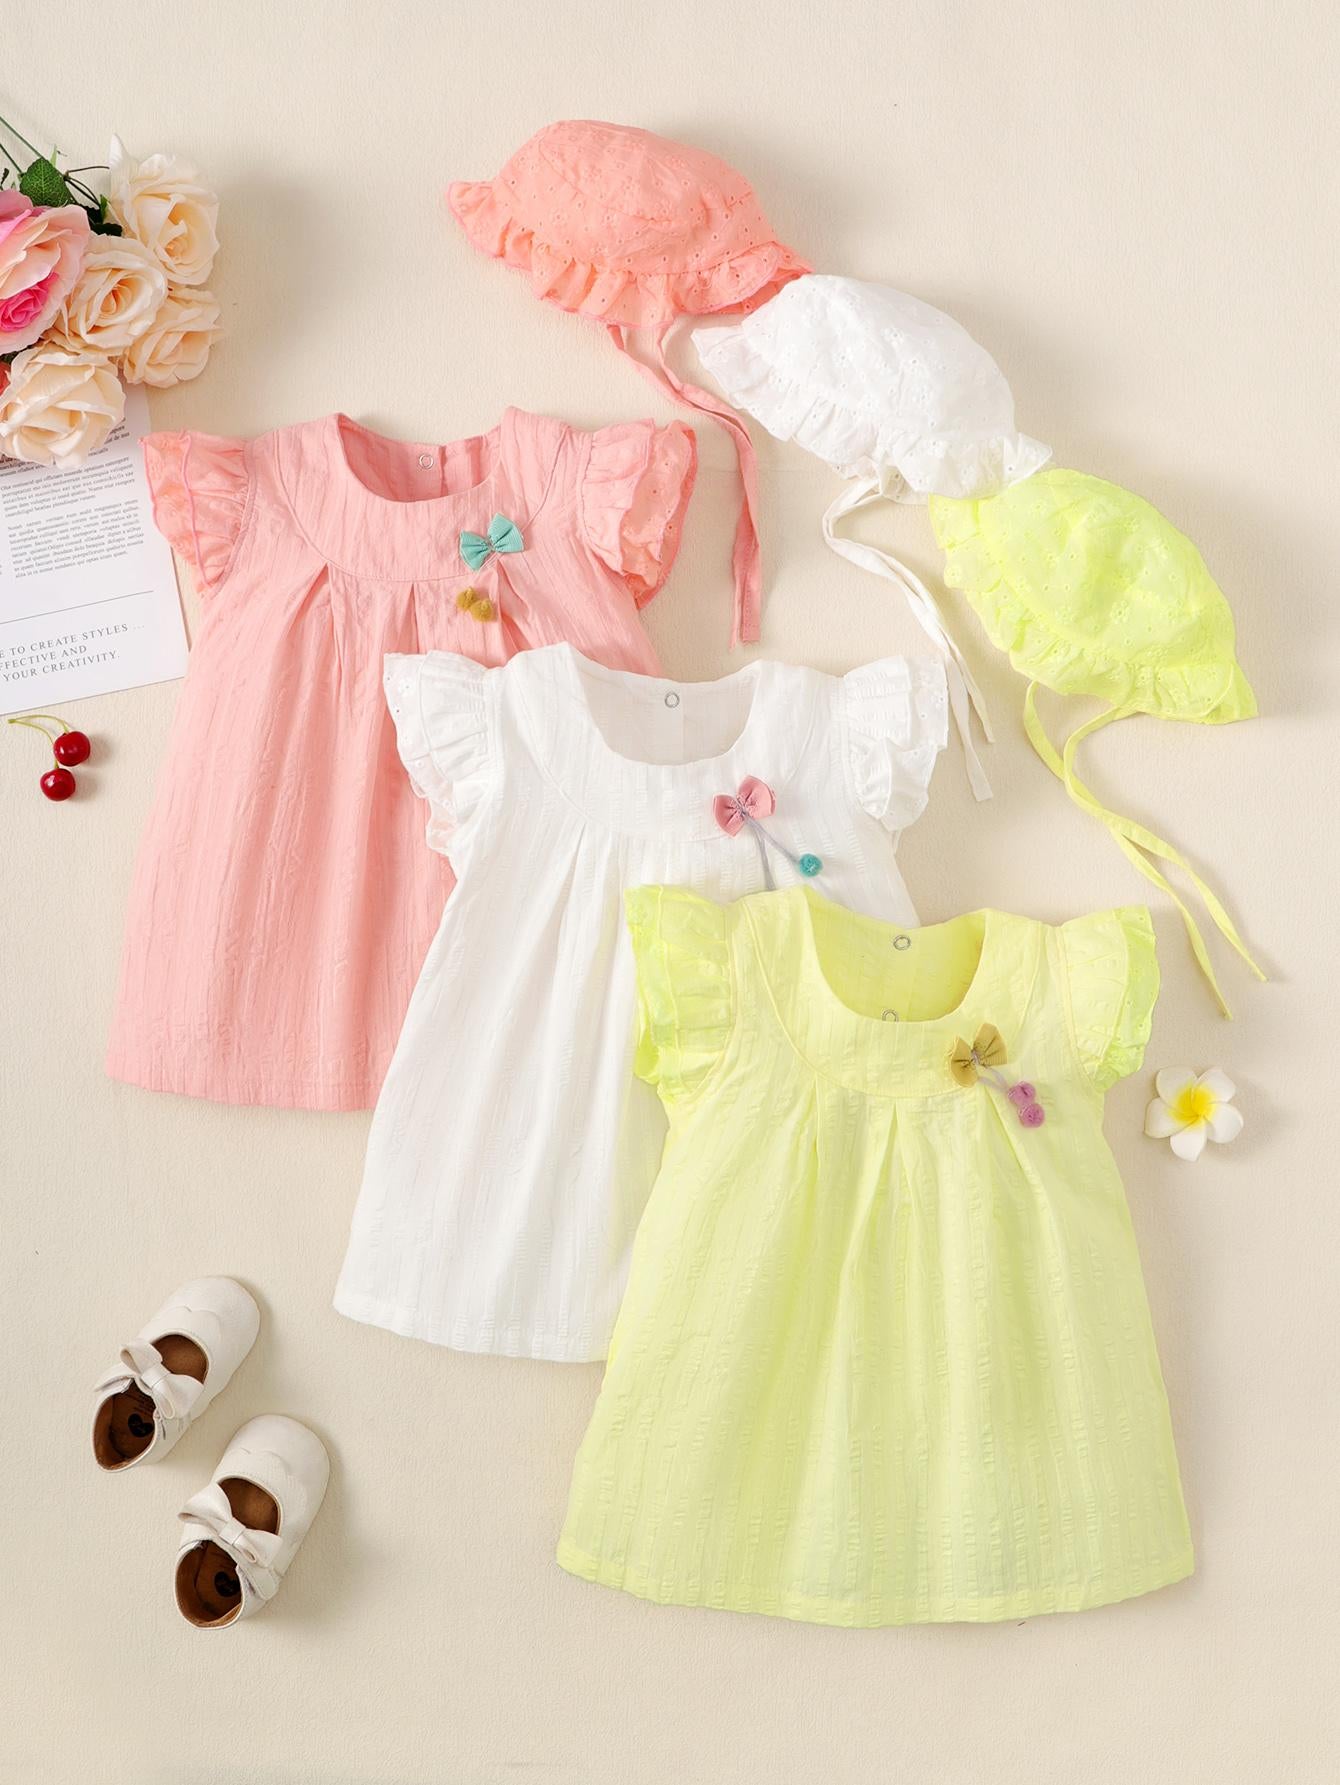 2-15M Kid Fashion Ready Stock Girls Outfits Sleeveless Solid Color Summer Dress With Hat 2Pcs Clothes Set Catpapa  ZX-ZB001